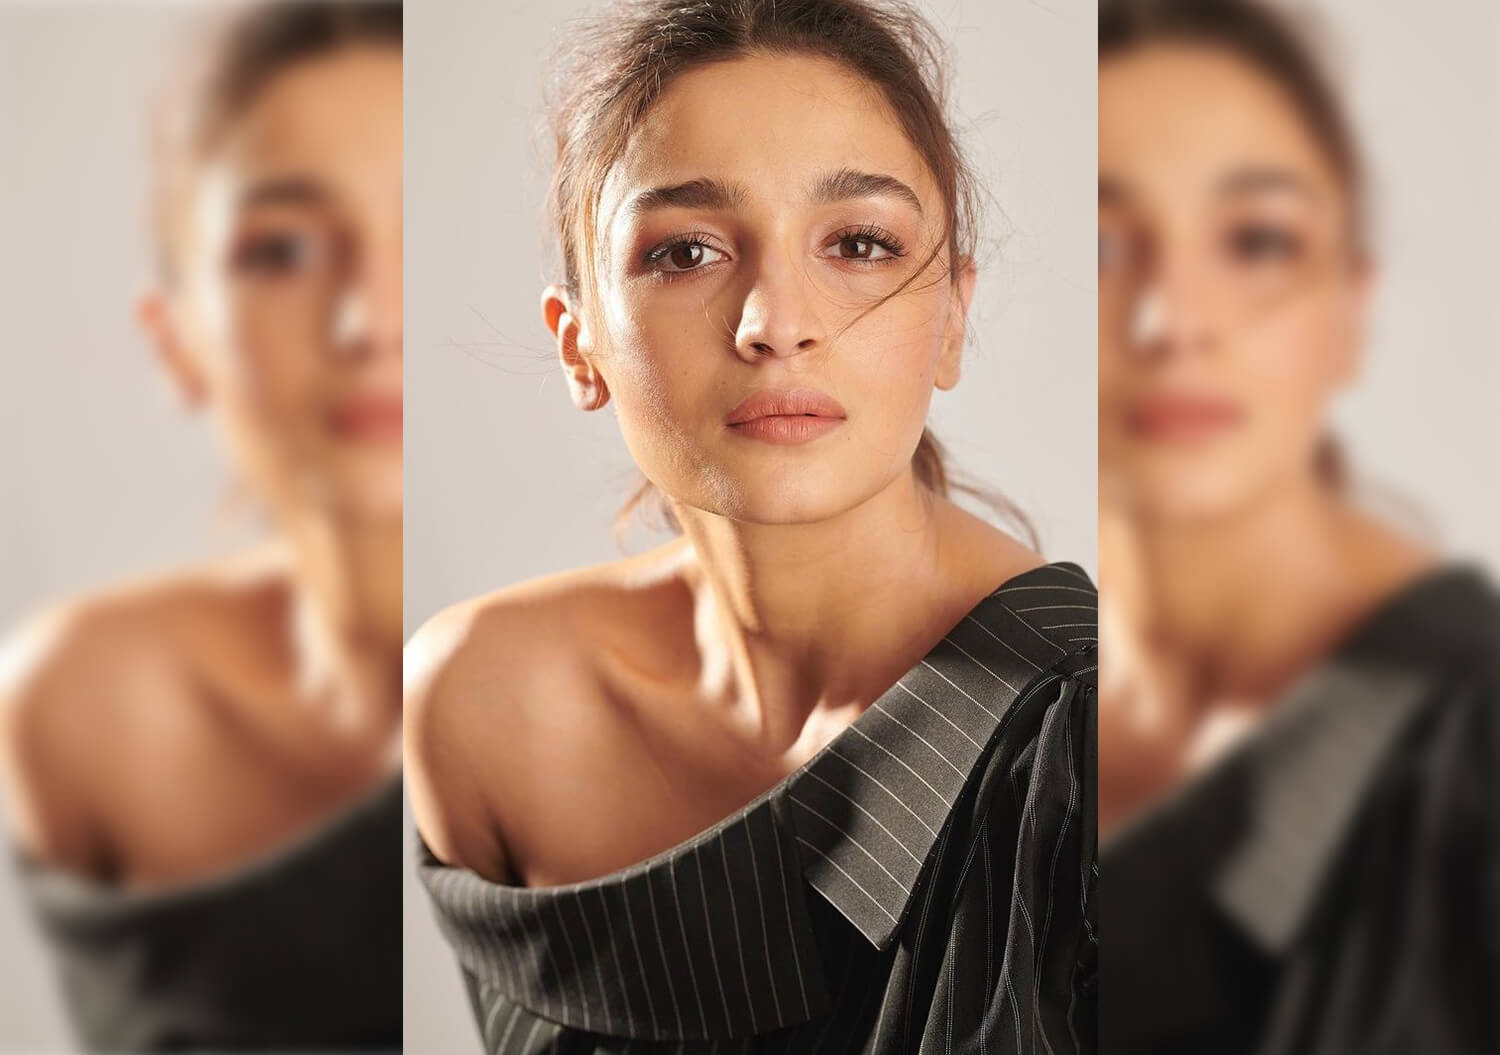 How bride Alia Bhatt epitomizes elegance with her beauty looks | Times of  India